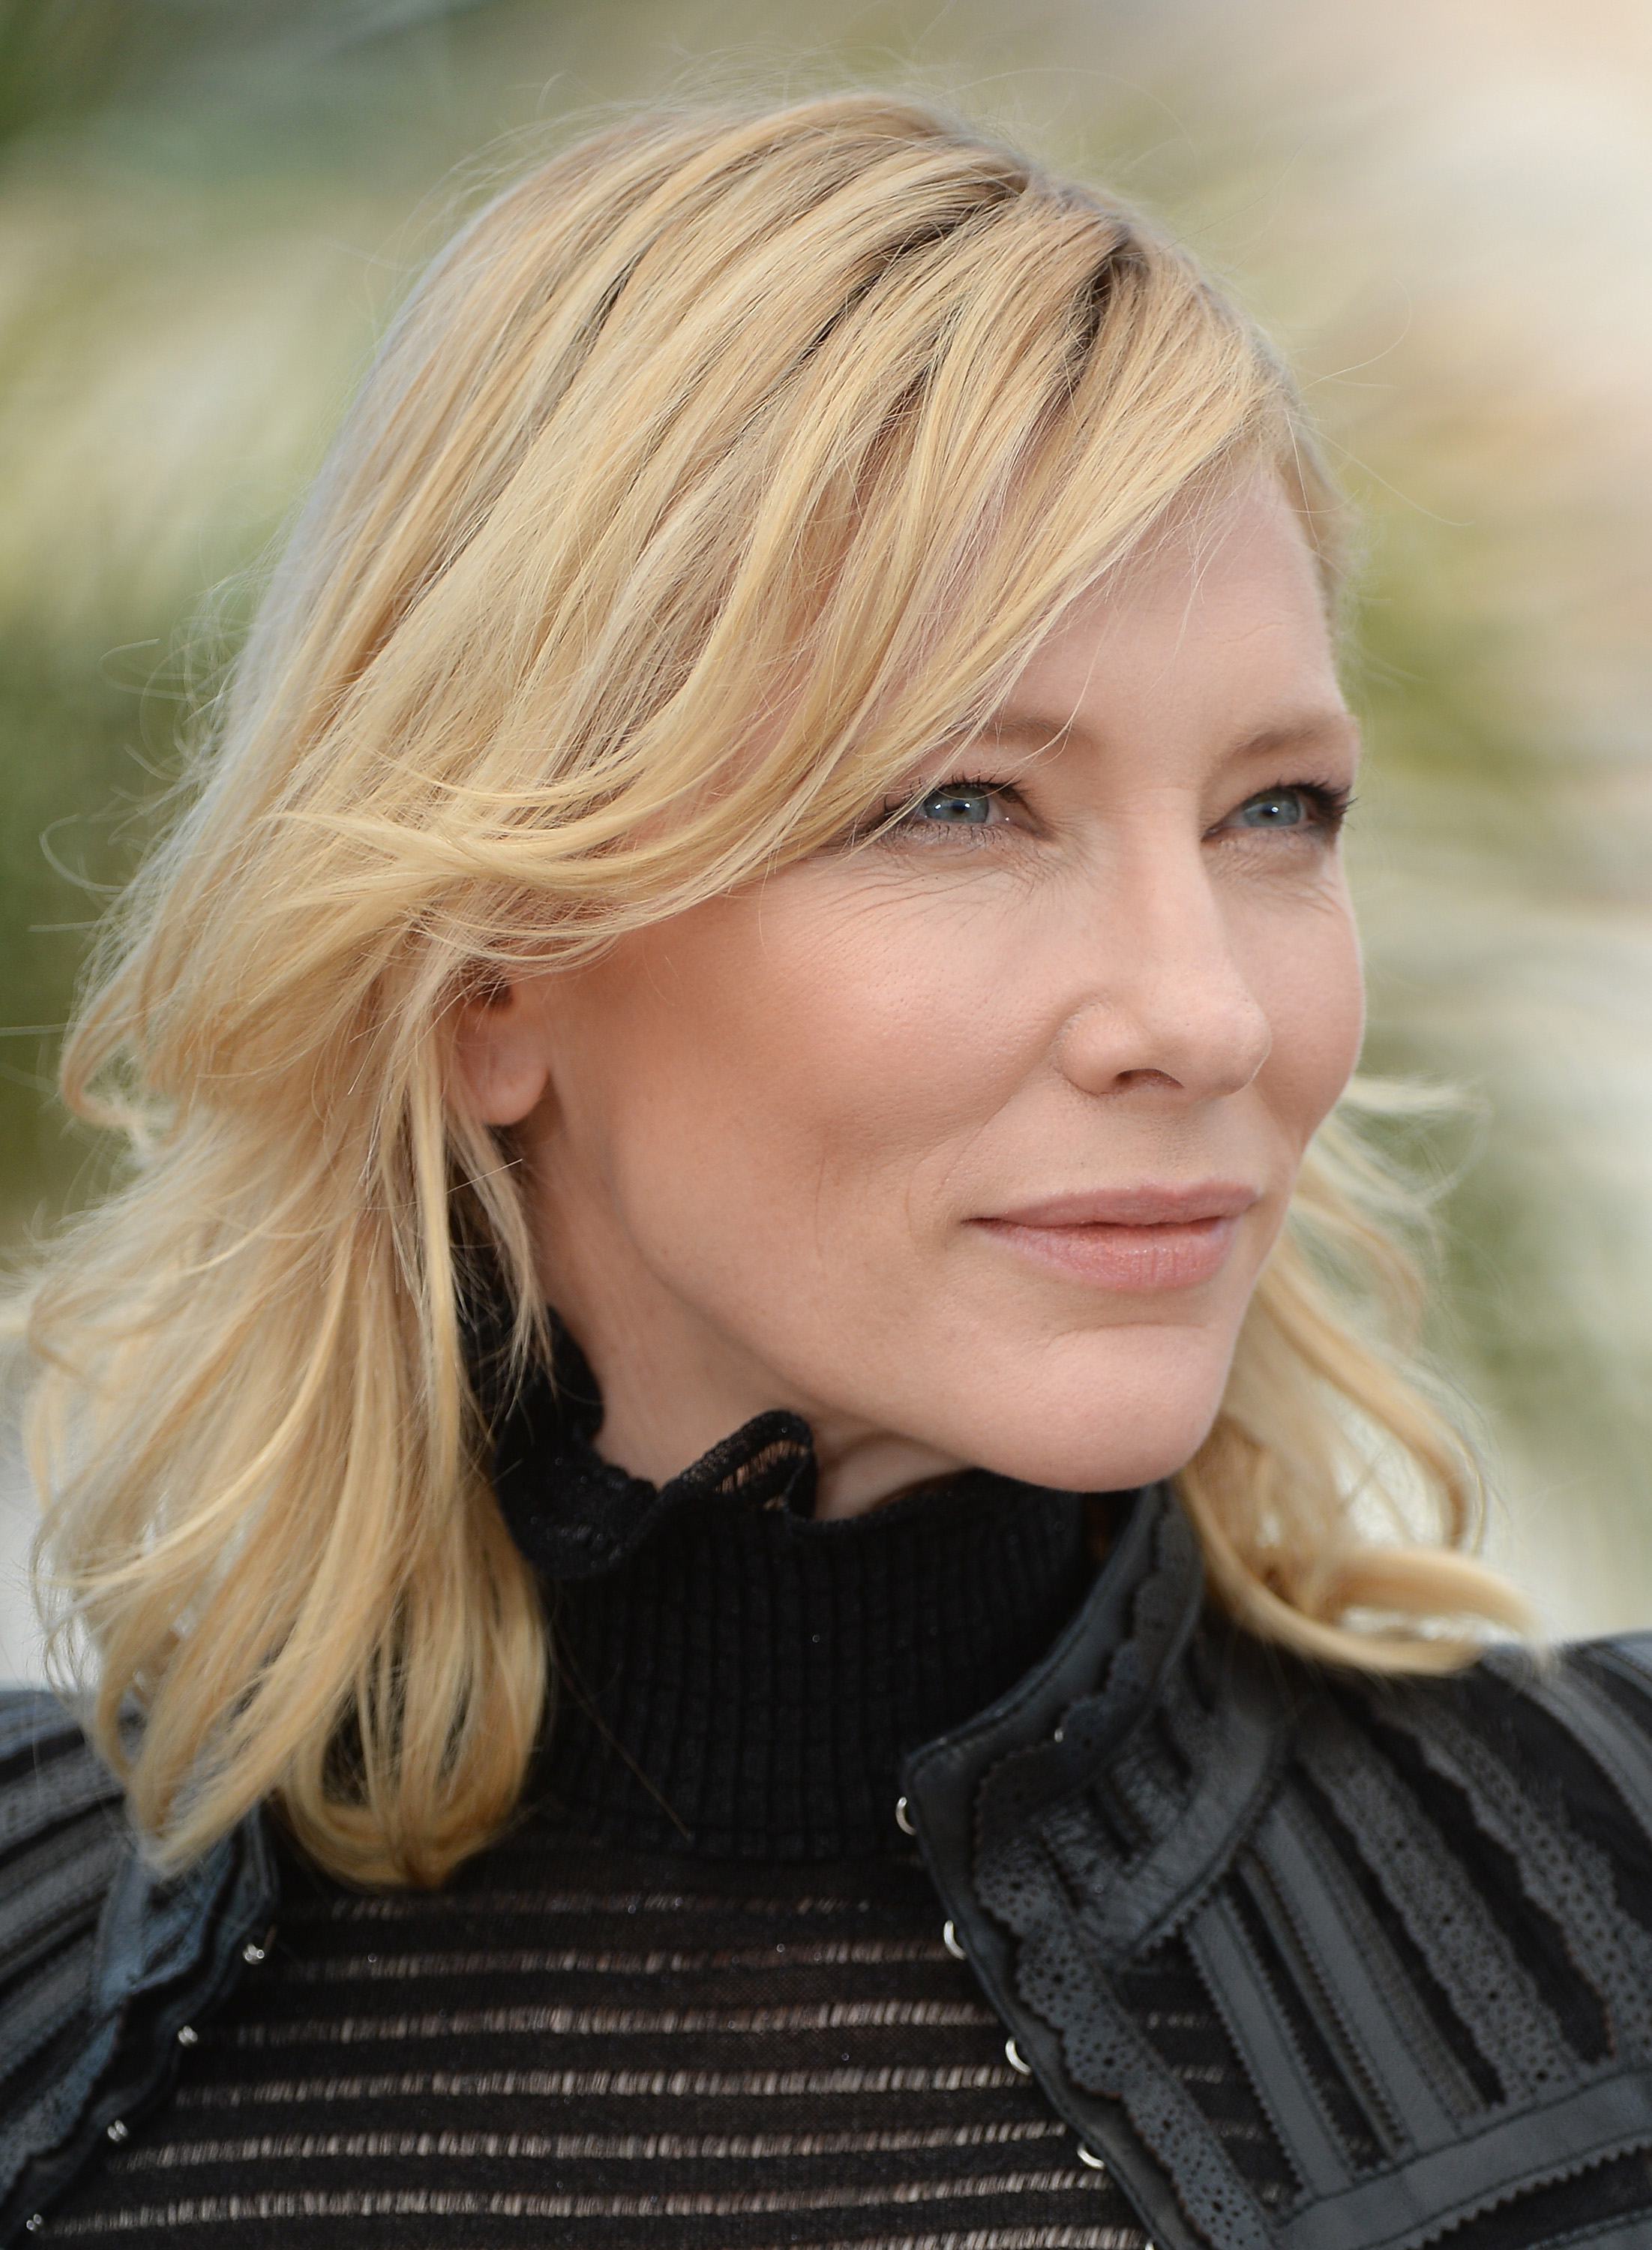 Actress Cate Blanchett attends the "Carol" Photocall during the 68th annual Cannes Film Festival on May 17, 2015 in Cannes, France.